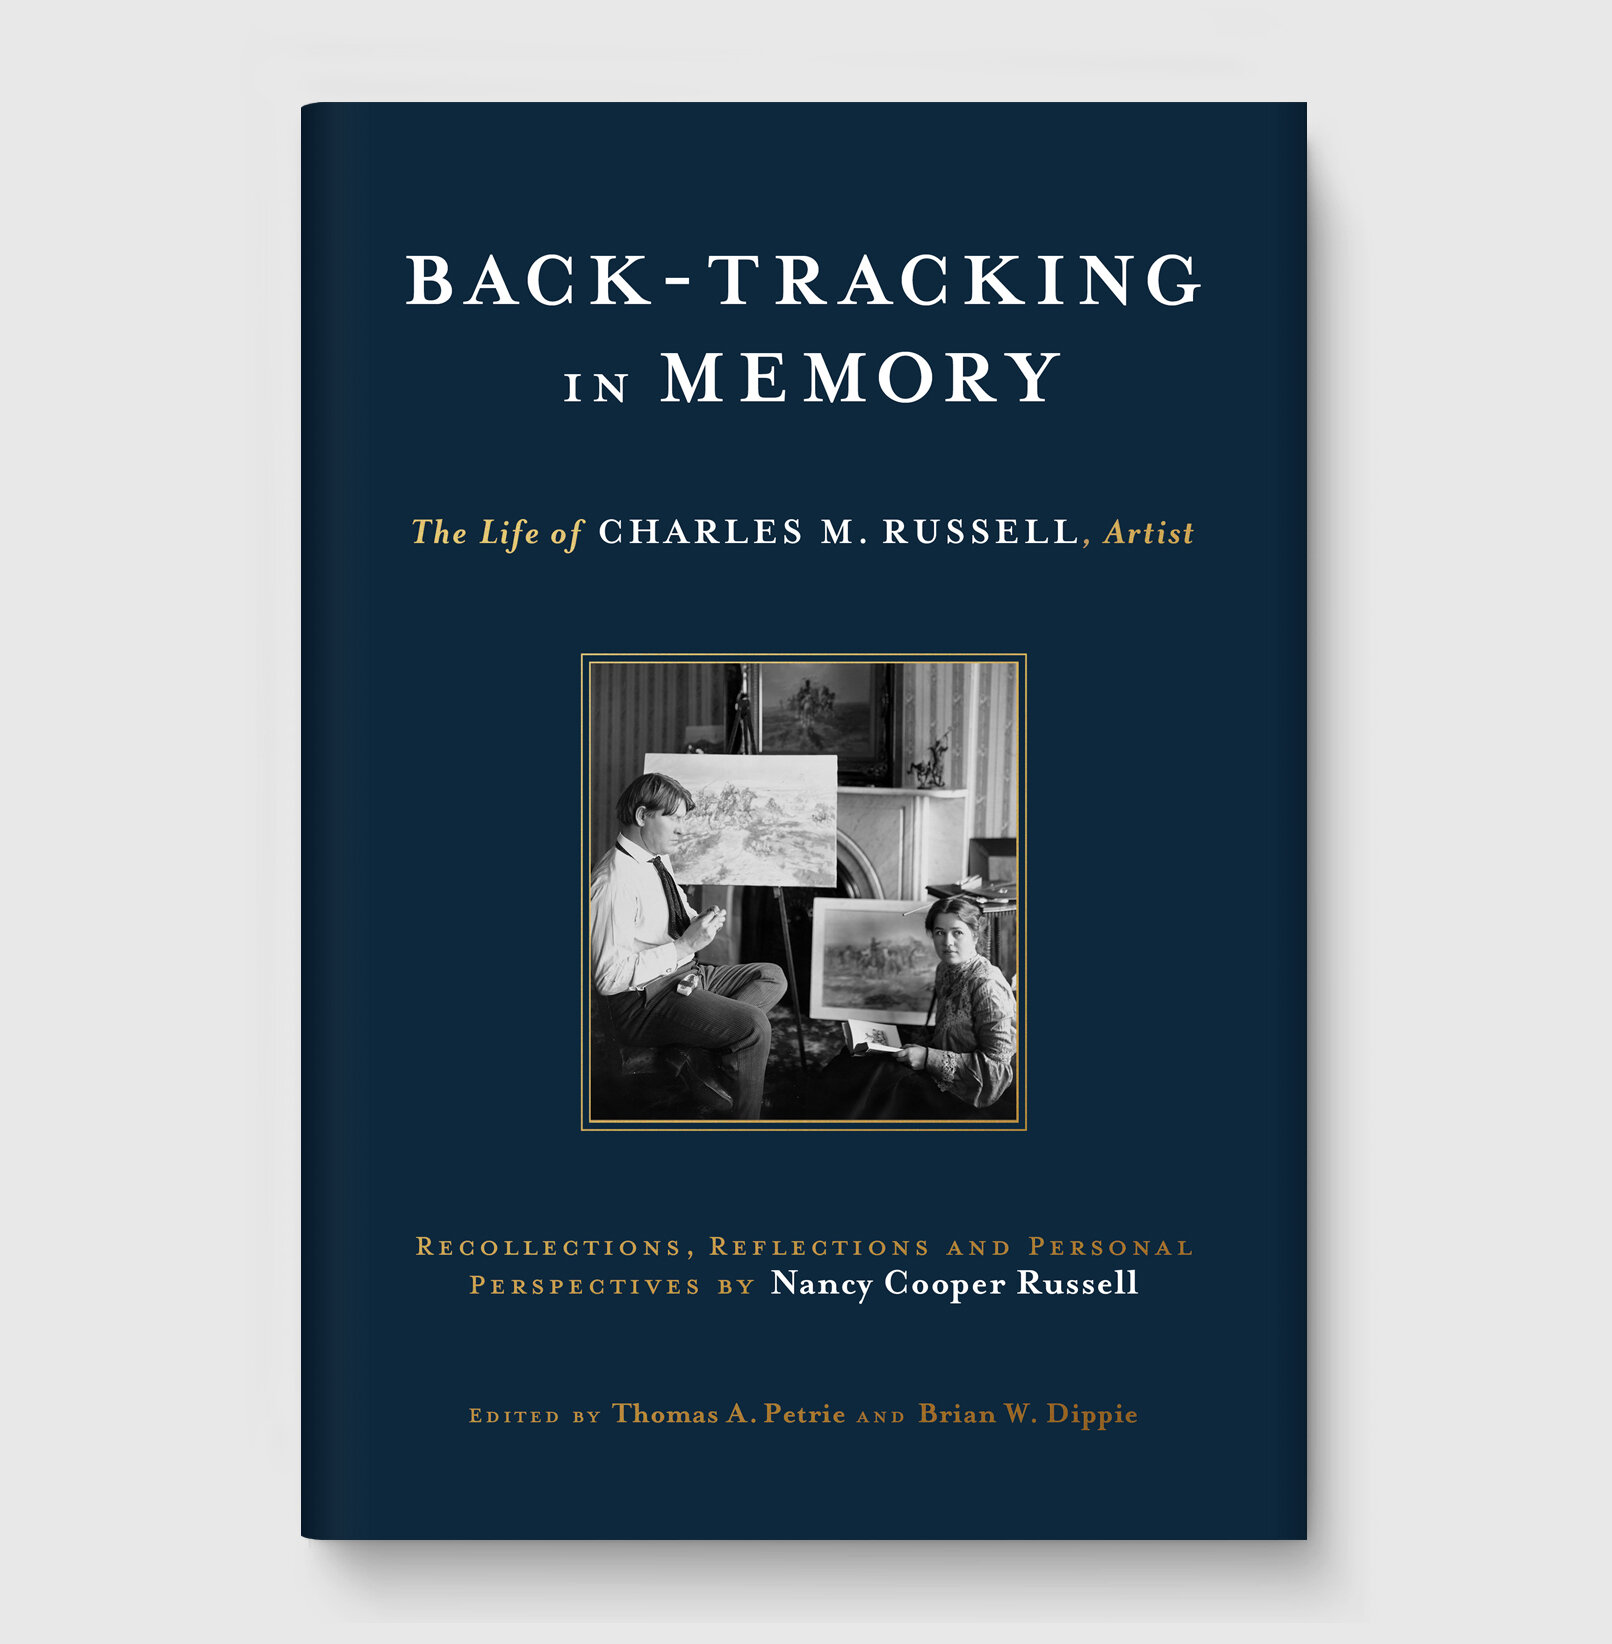 Back-tracking in Memory